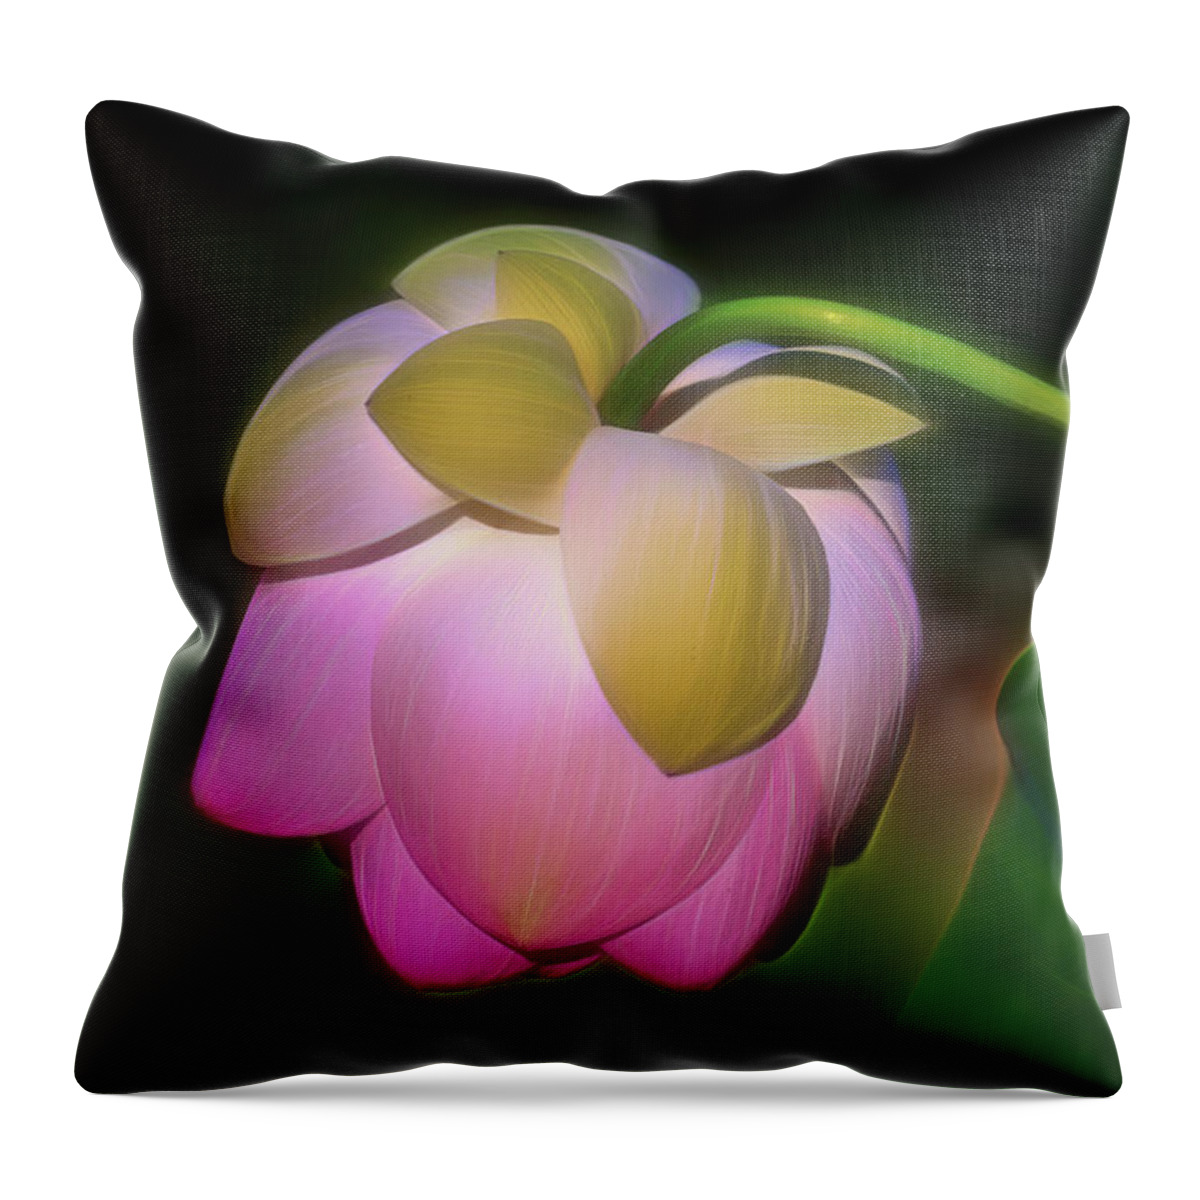 Flora Throw Pillow featuring the photograph Lotus, Upside Down by Cindy Lark Hartman